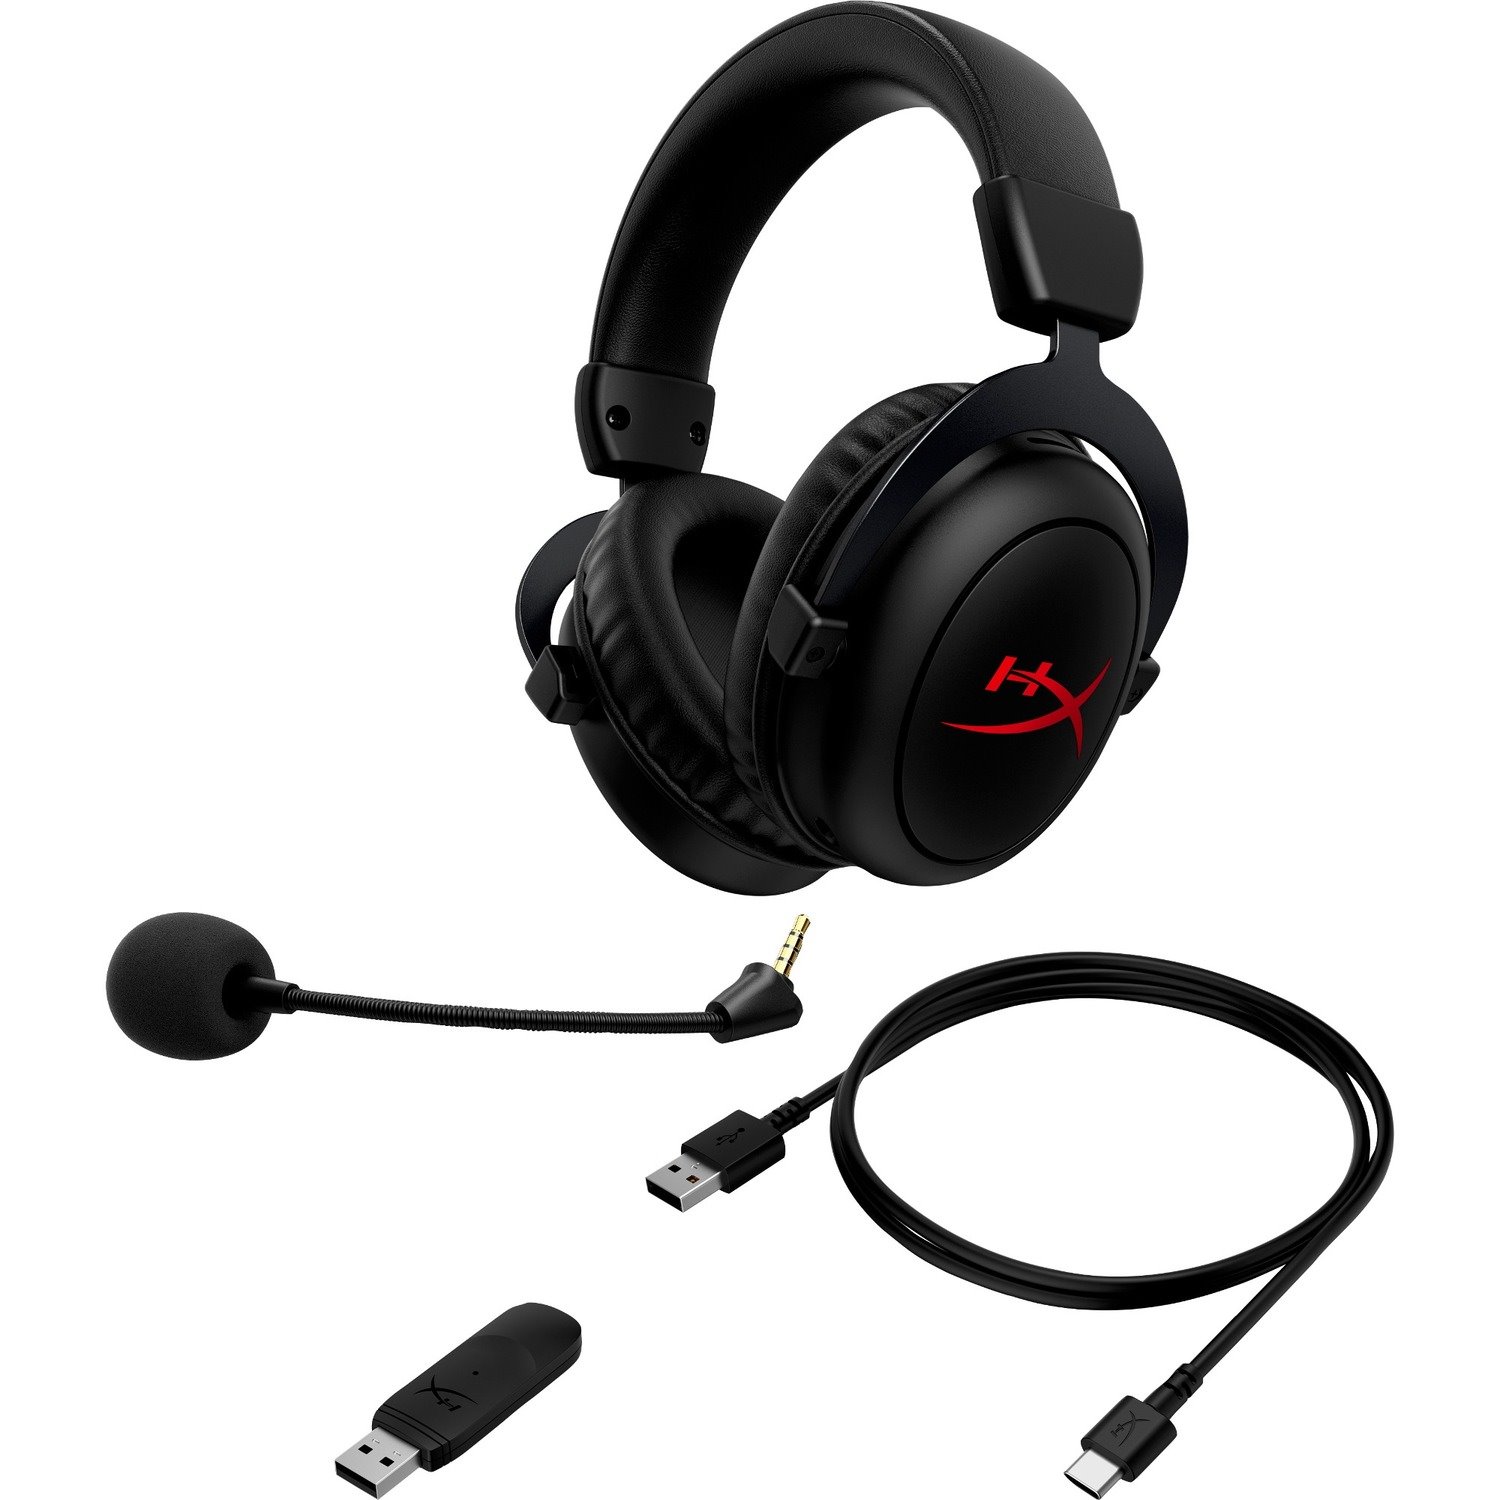 HyperX HyperX Cloud Core Wireless Over-the-ear Stereo Gaming Headset - Black